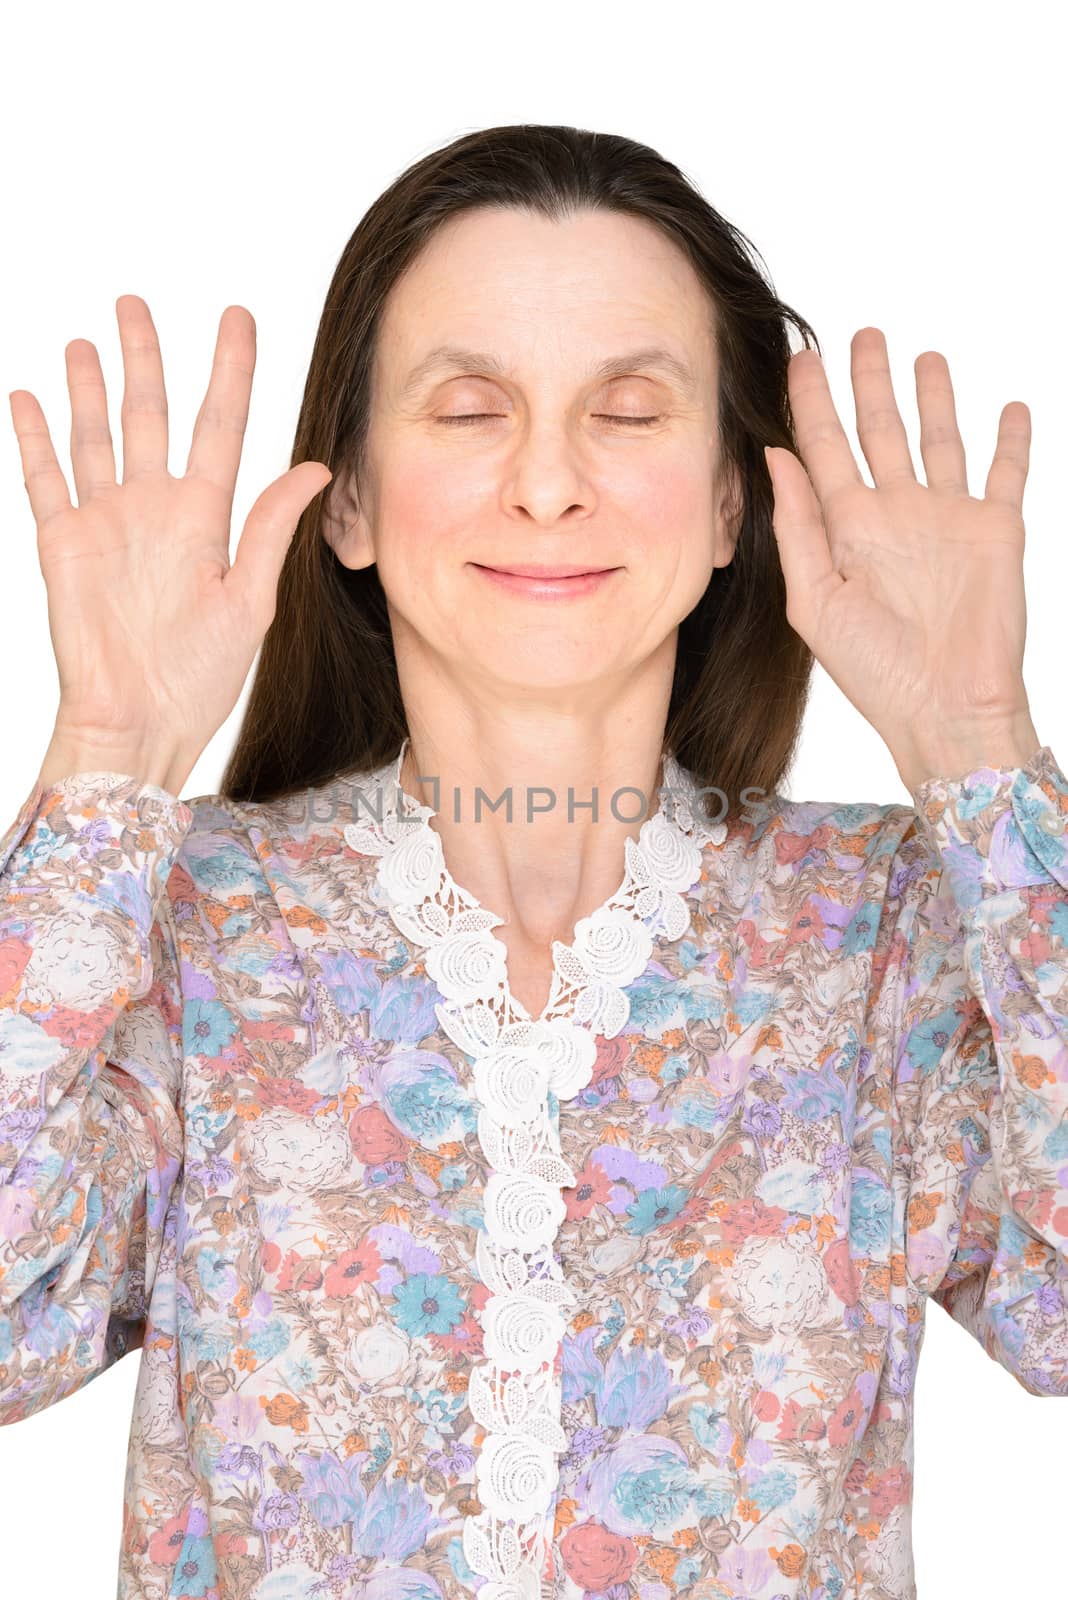 Smiling woman with closed eyes and open hands up showing the palms close to the face to express a lack of interest